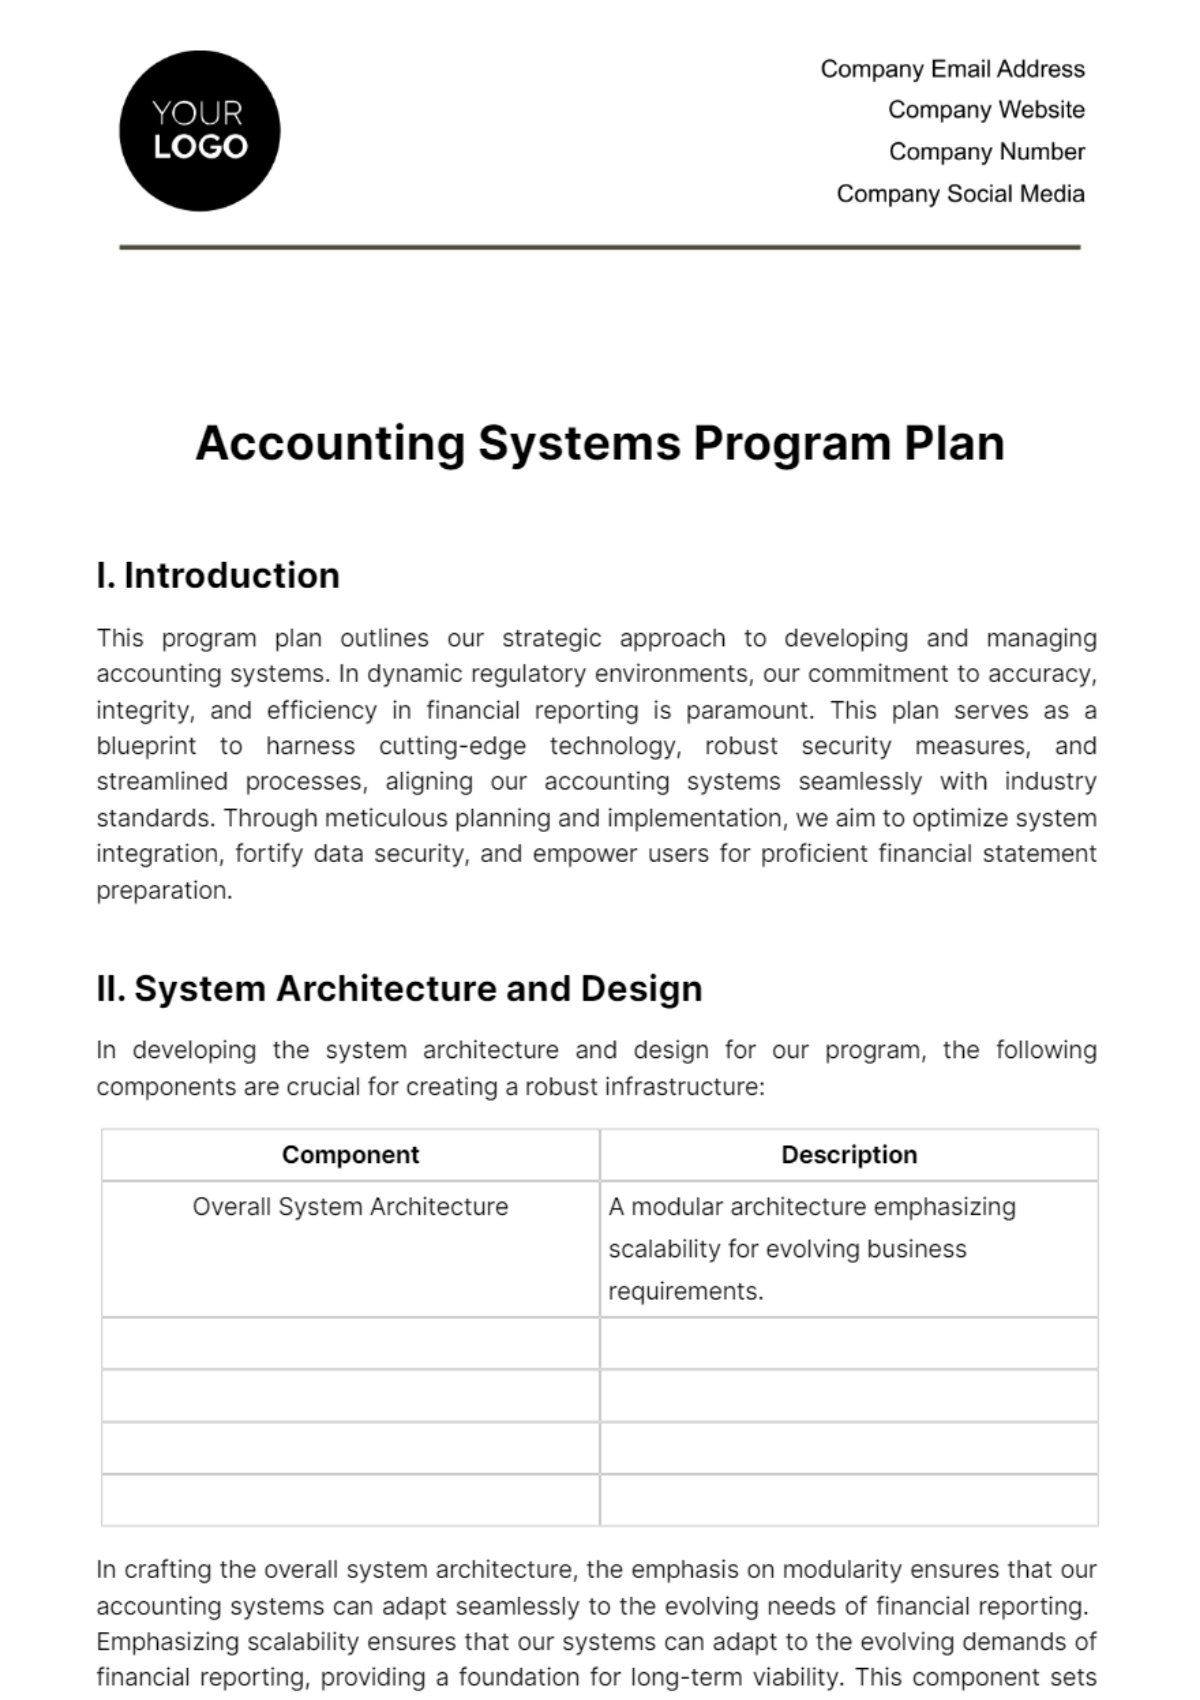 Free Accounting Systems Program Plan Template